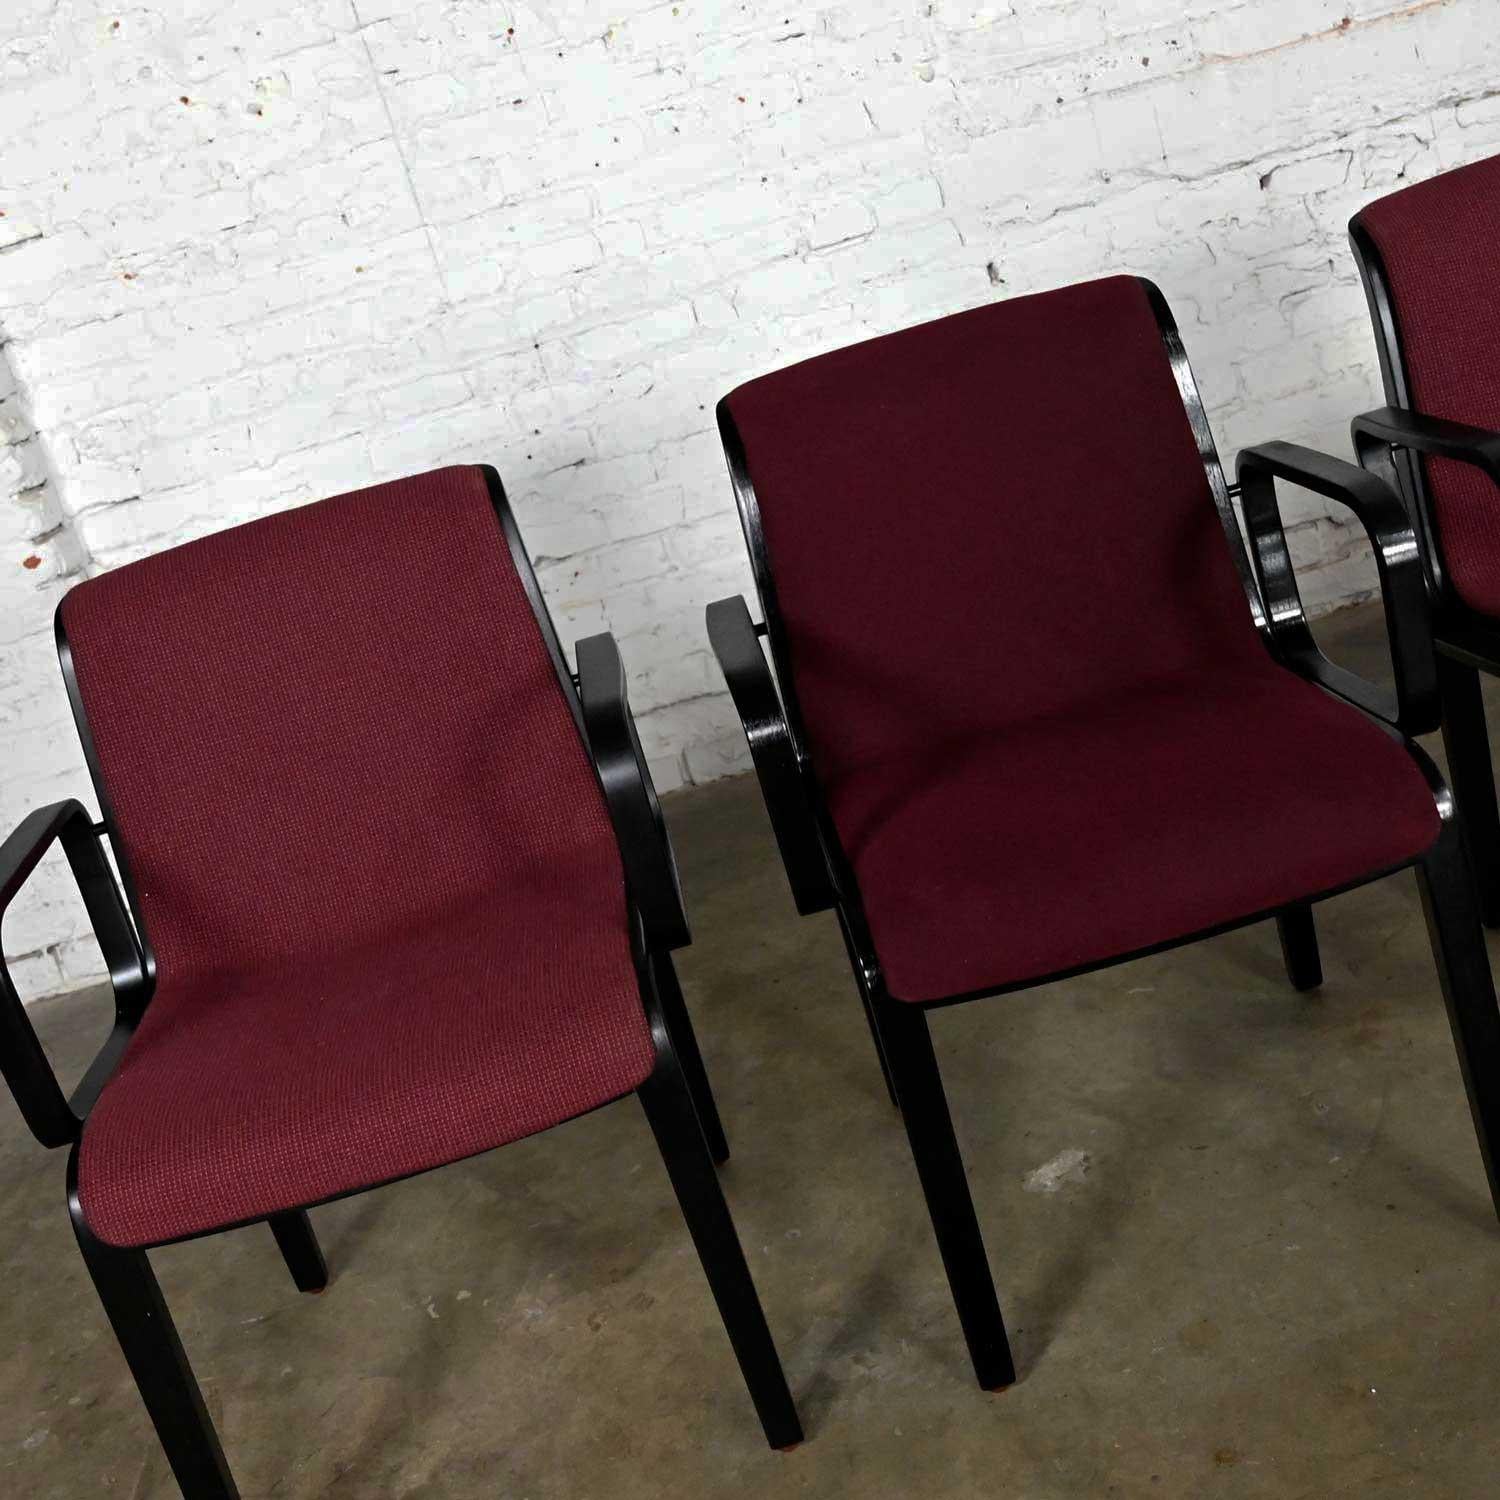 5 Knoll MCM Bentwood 1300 Series Dining Chairs Maroon & Black by Bill Stephens For Sale 8